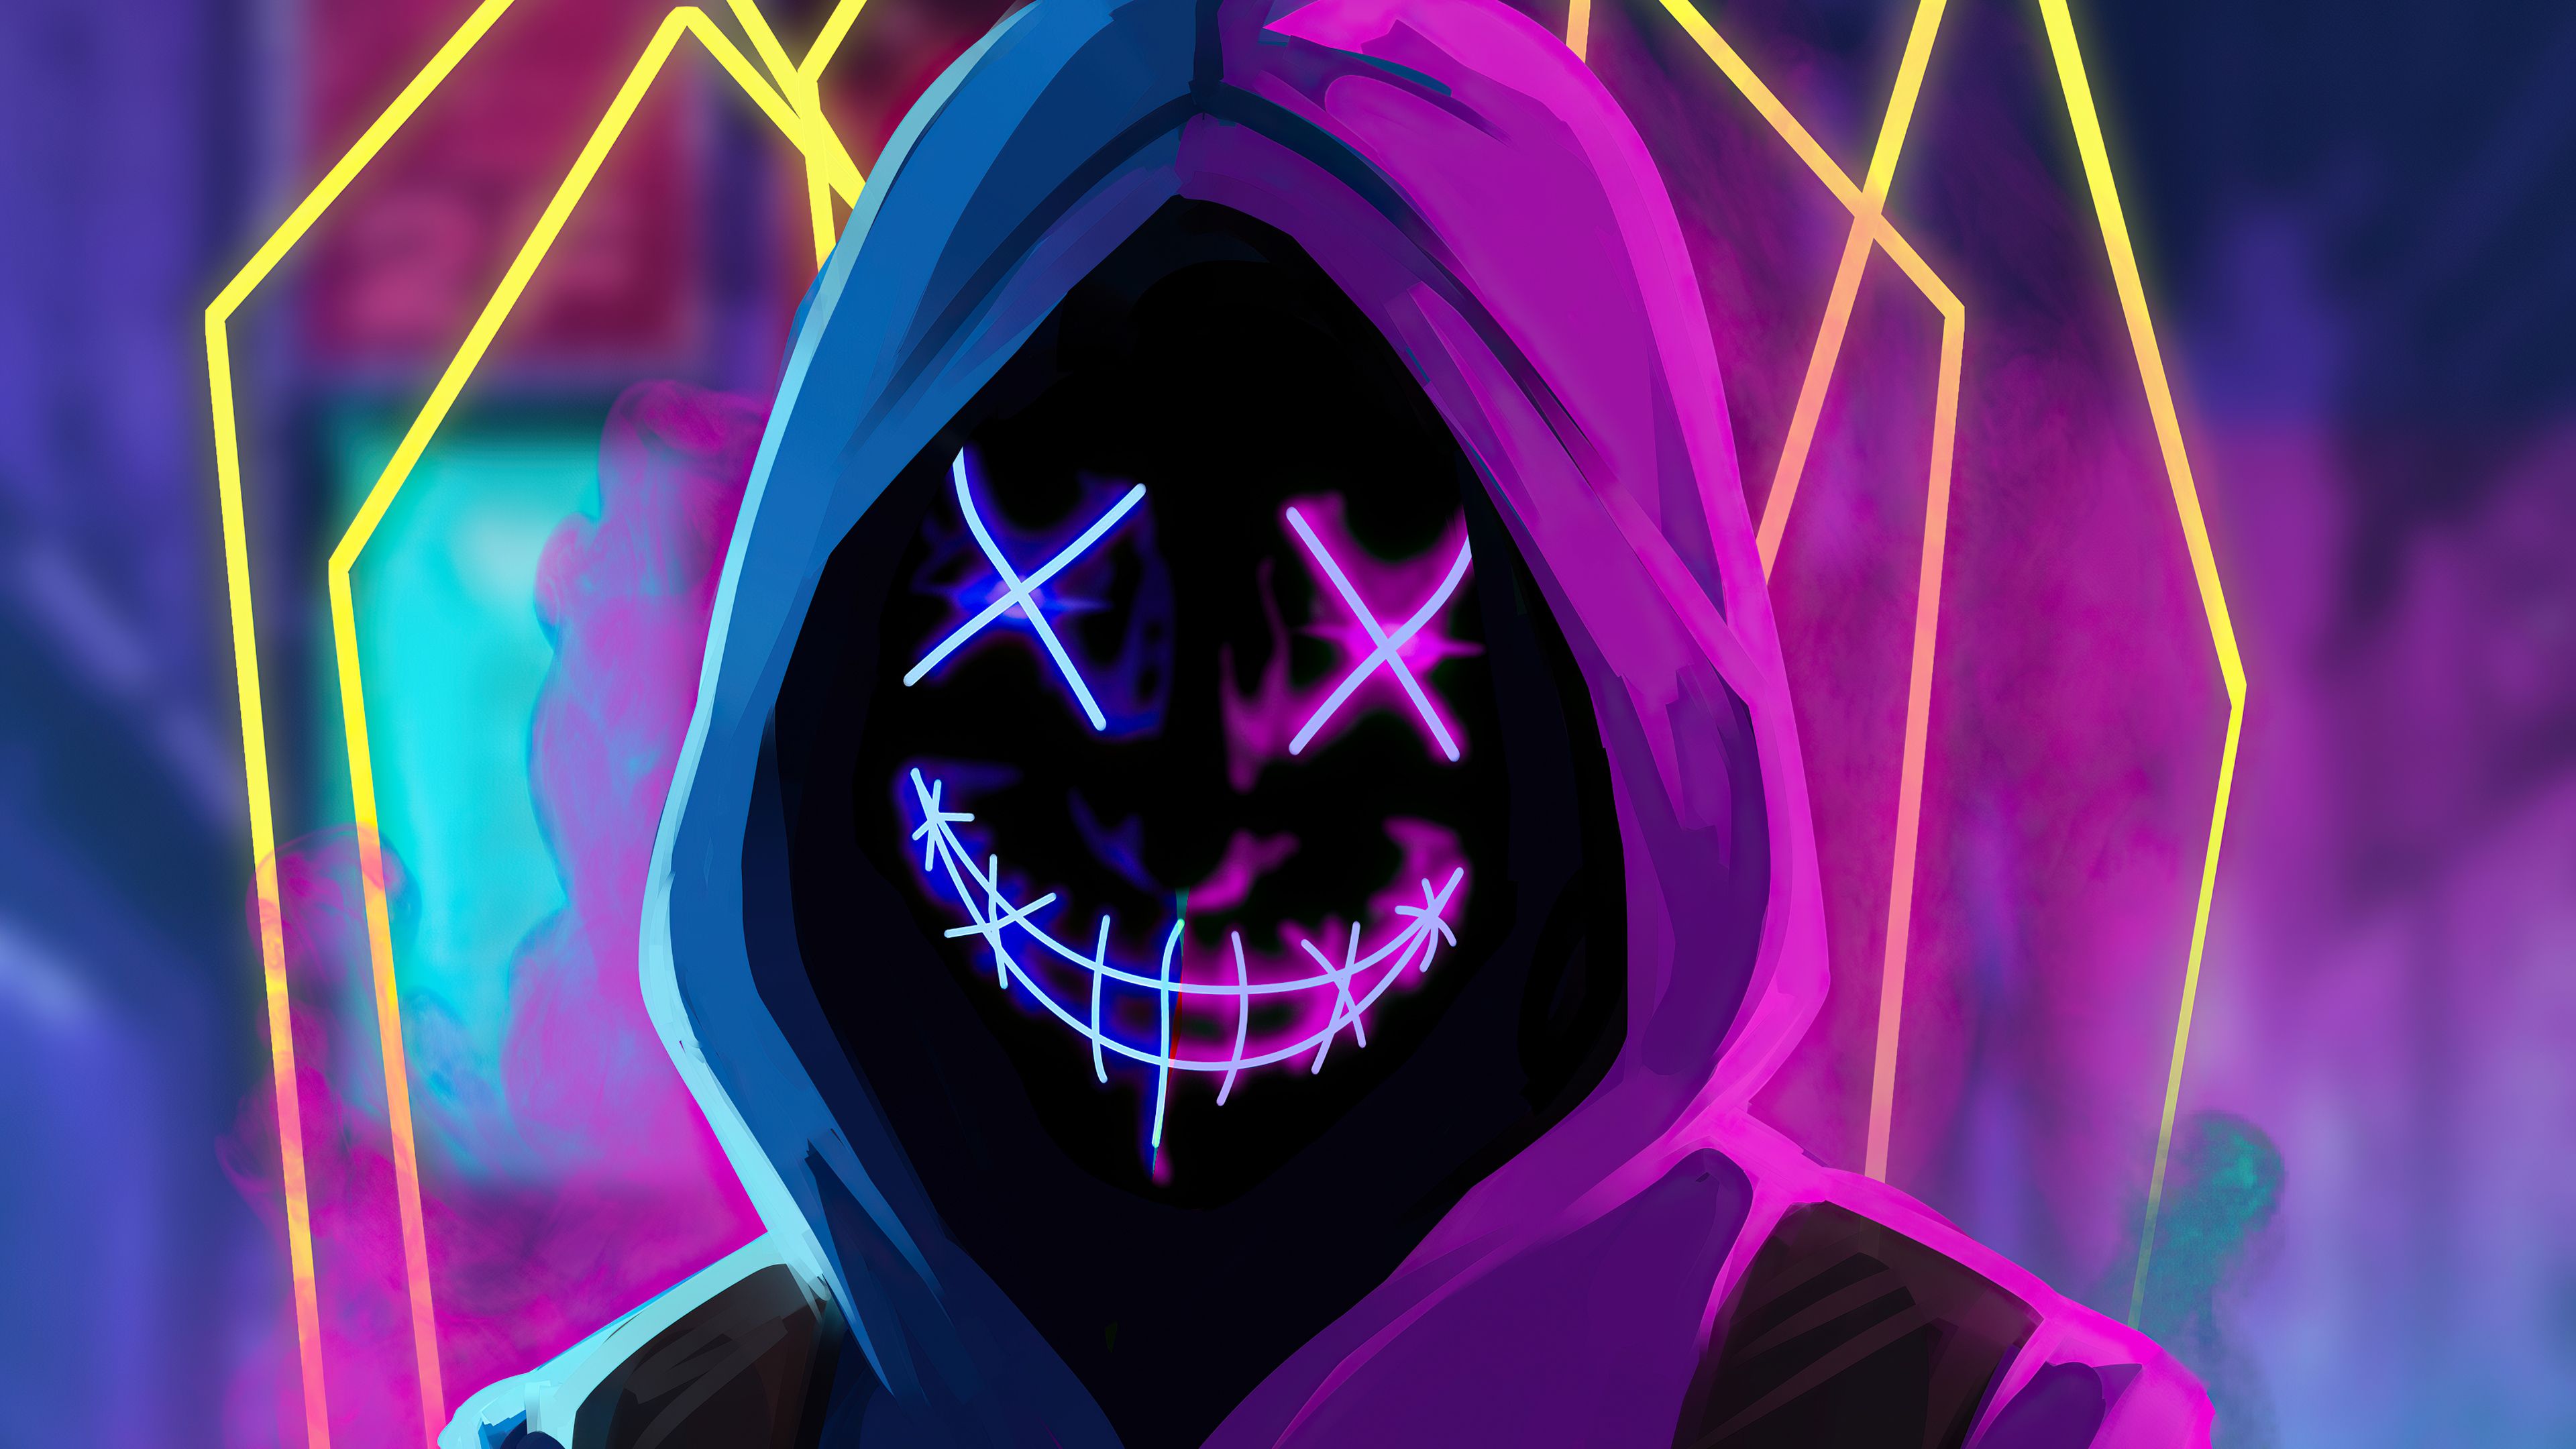 Mask Neon Guy, HD Artist, 4k Wallpaper, Image, Background, Photo and Picture